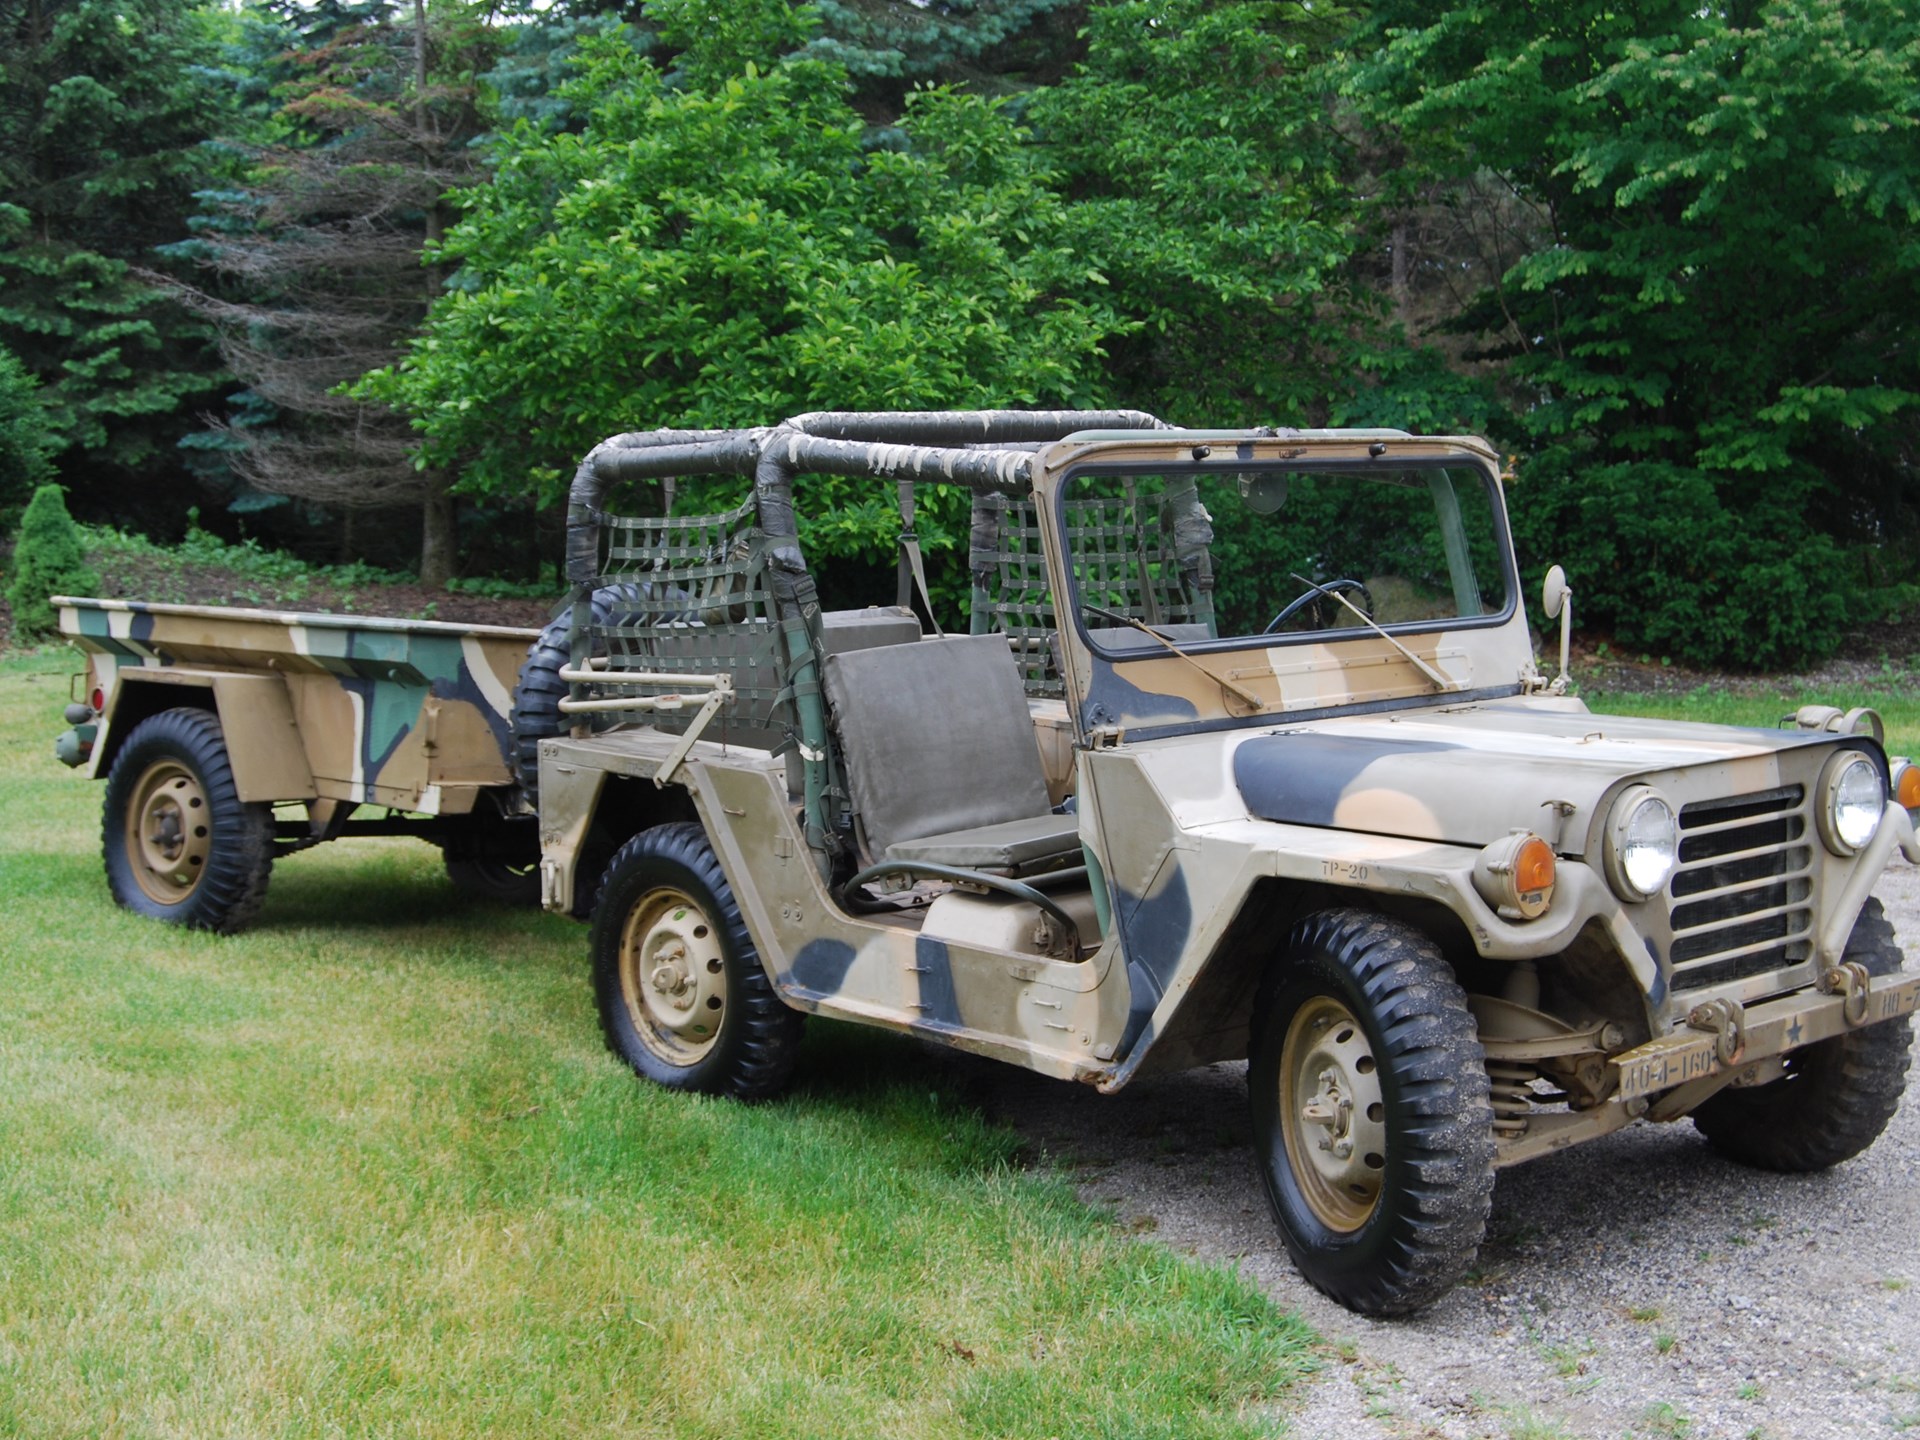 1970 AM General Military Jeep 151-A2 | Auburn Fall 2014 | RM Sotheby's